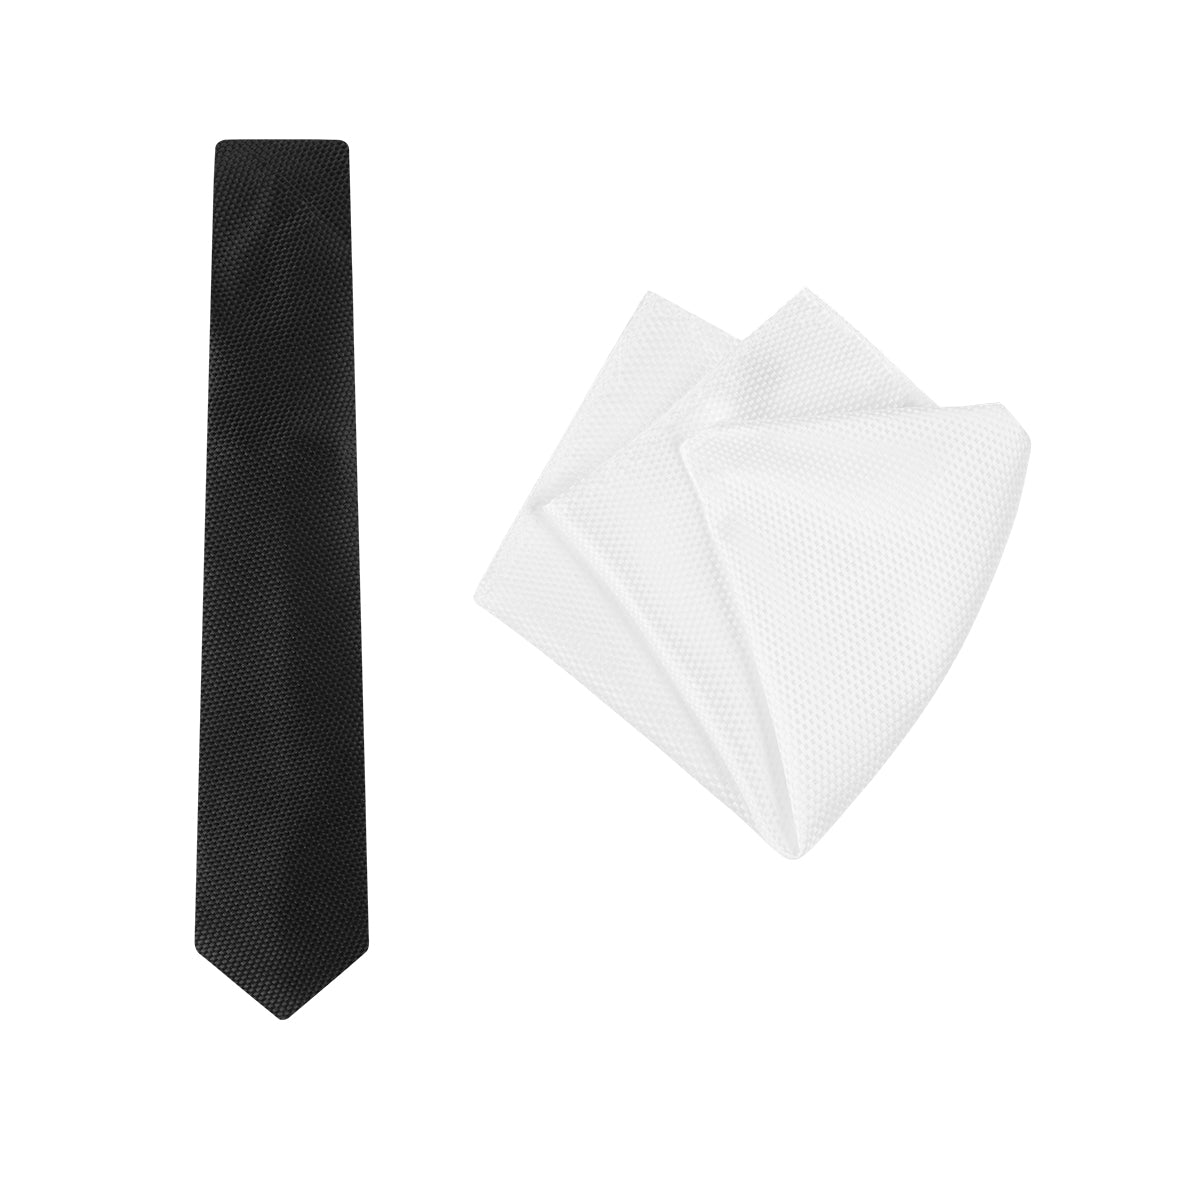 TIE + POCKET SQUARE SET. Carbon. Black/White. Supplied with a white pocket square.-Ties-PEROZ Accessories